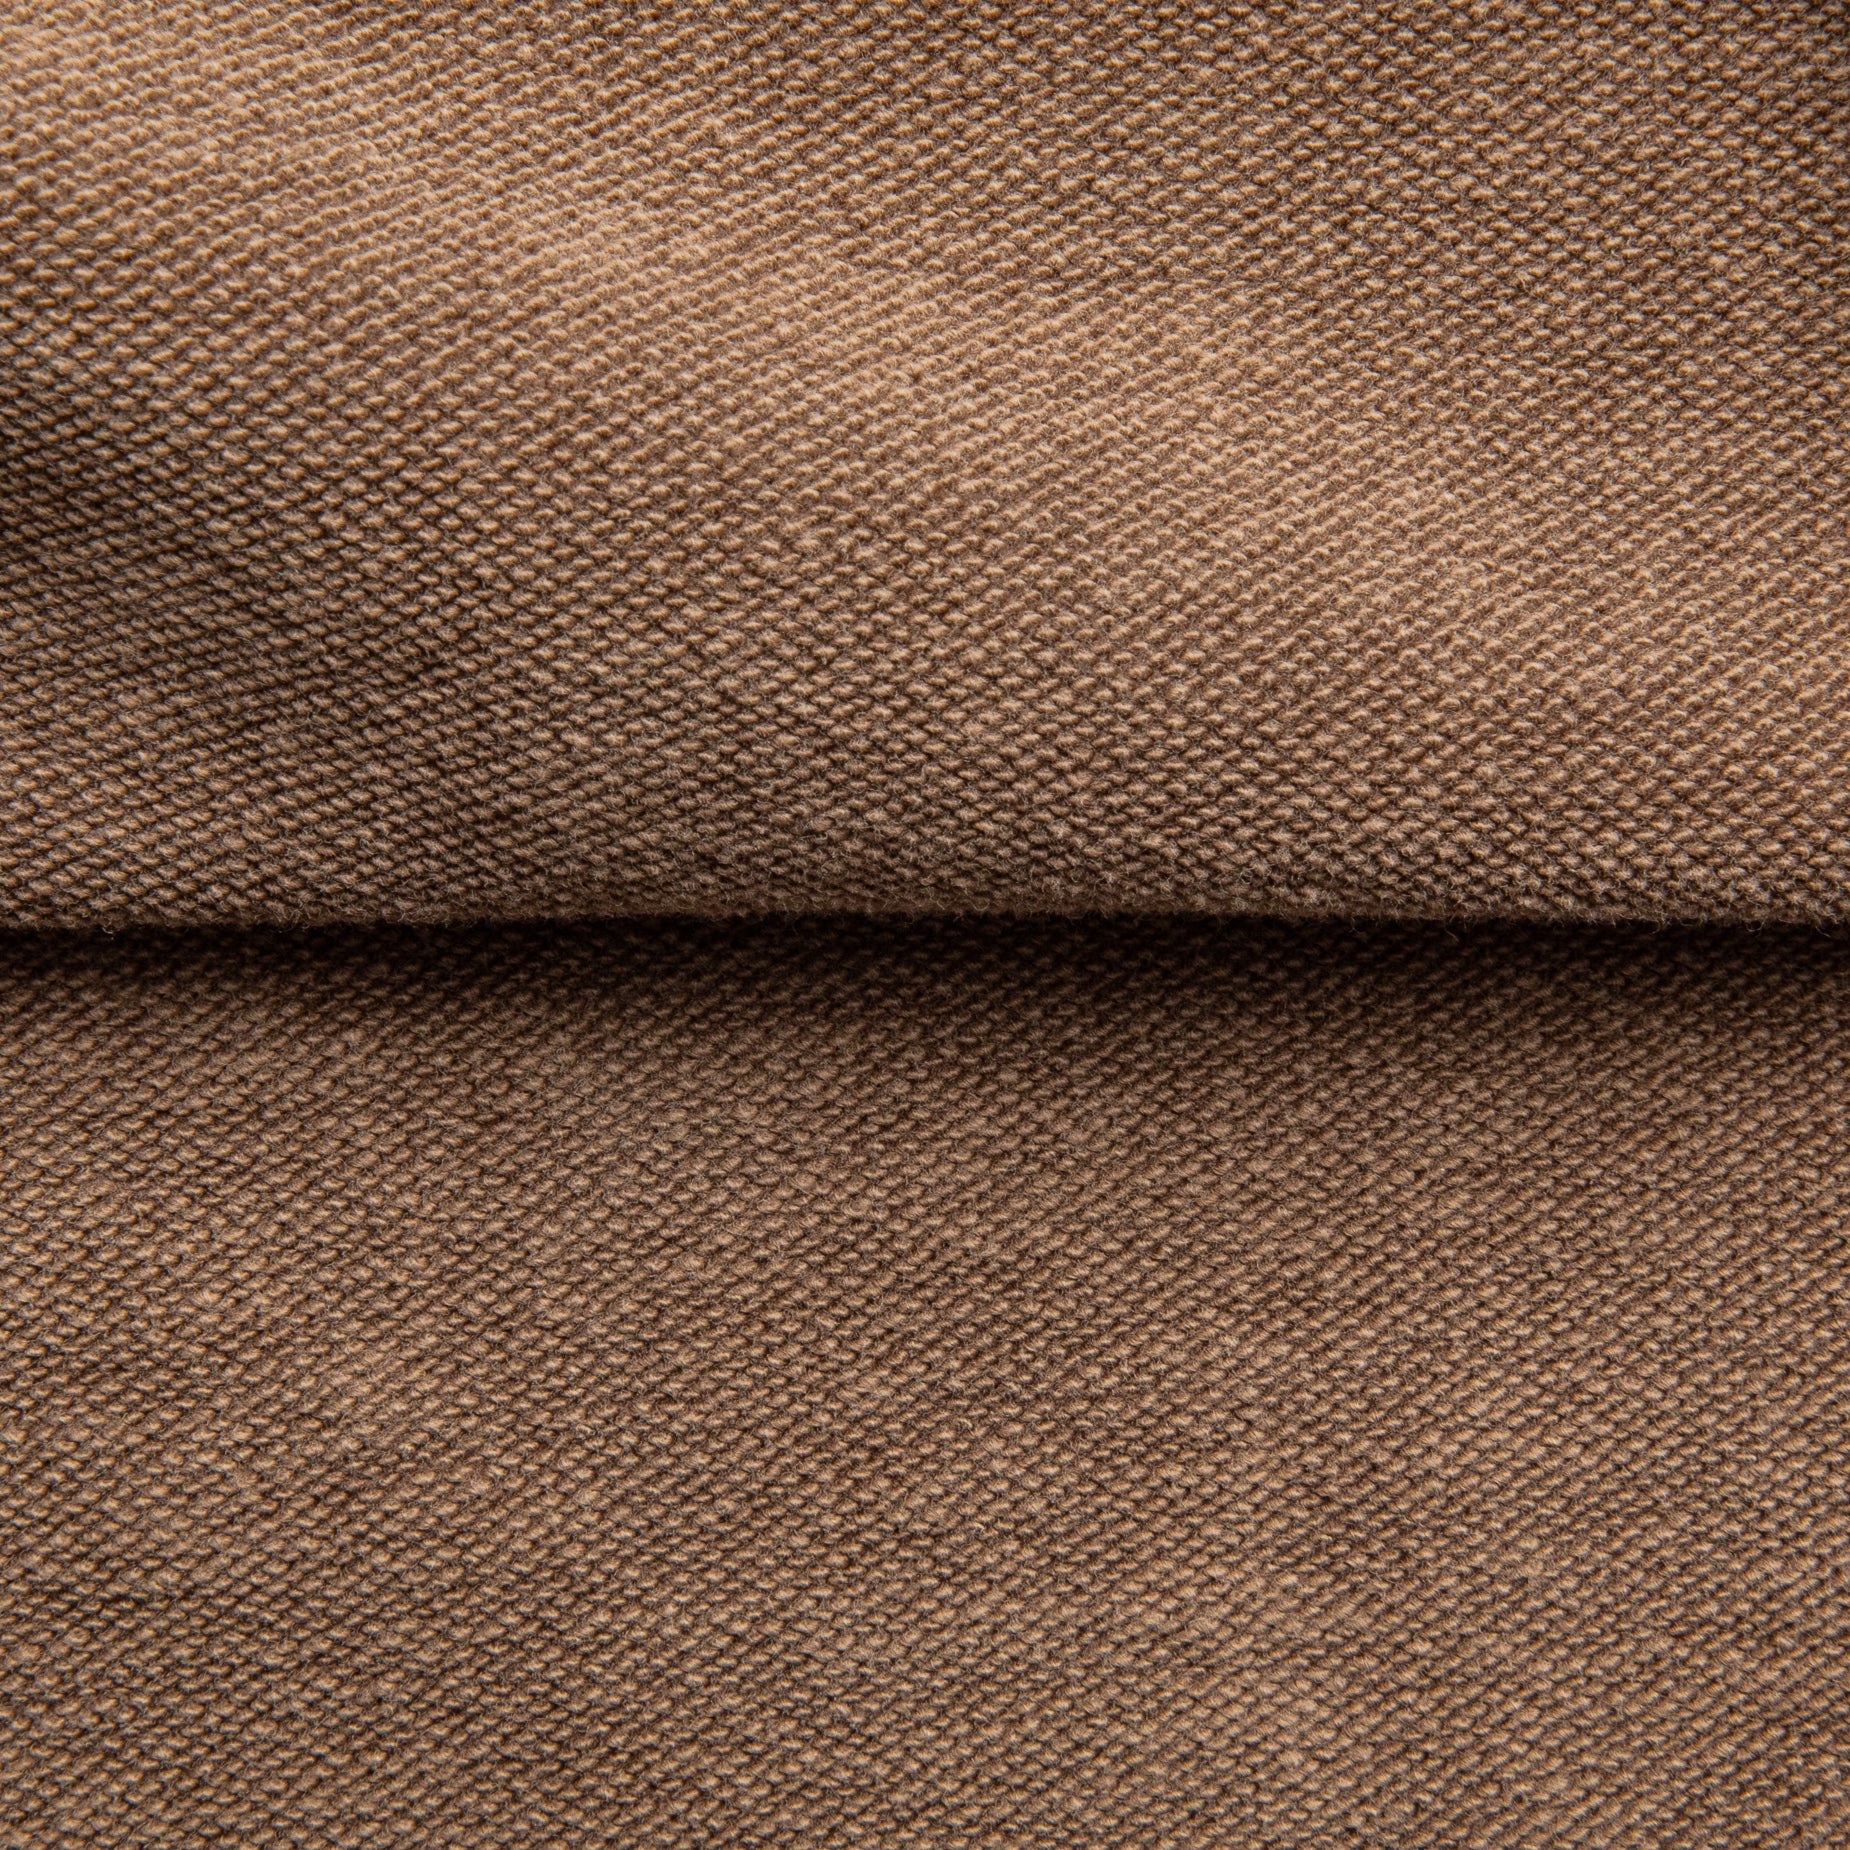 Remi Relief Special Finish Fleece Sweater Brown